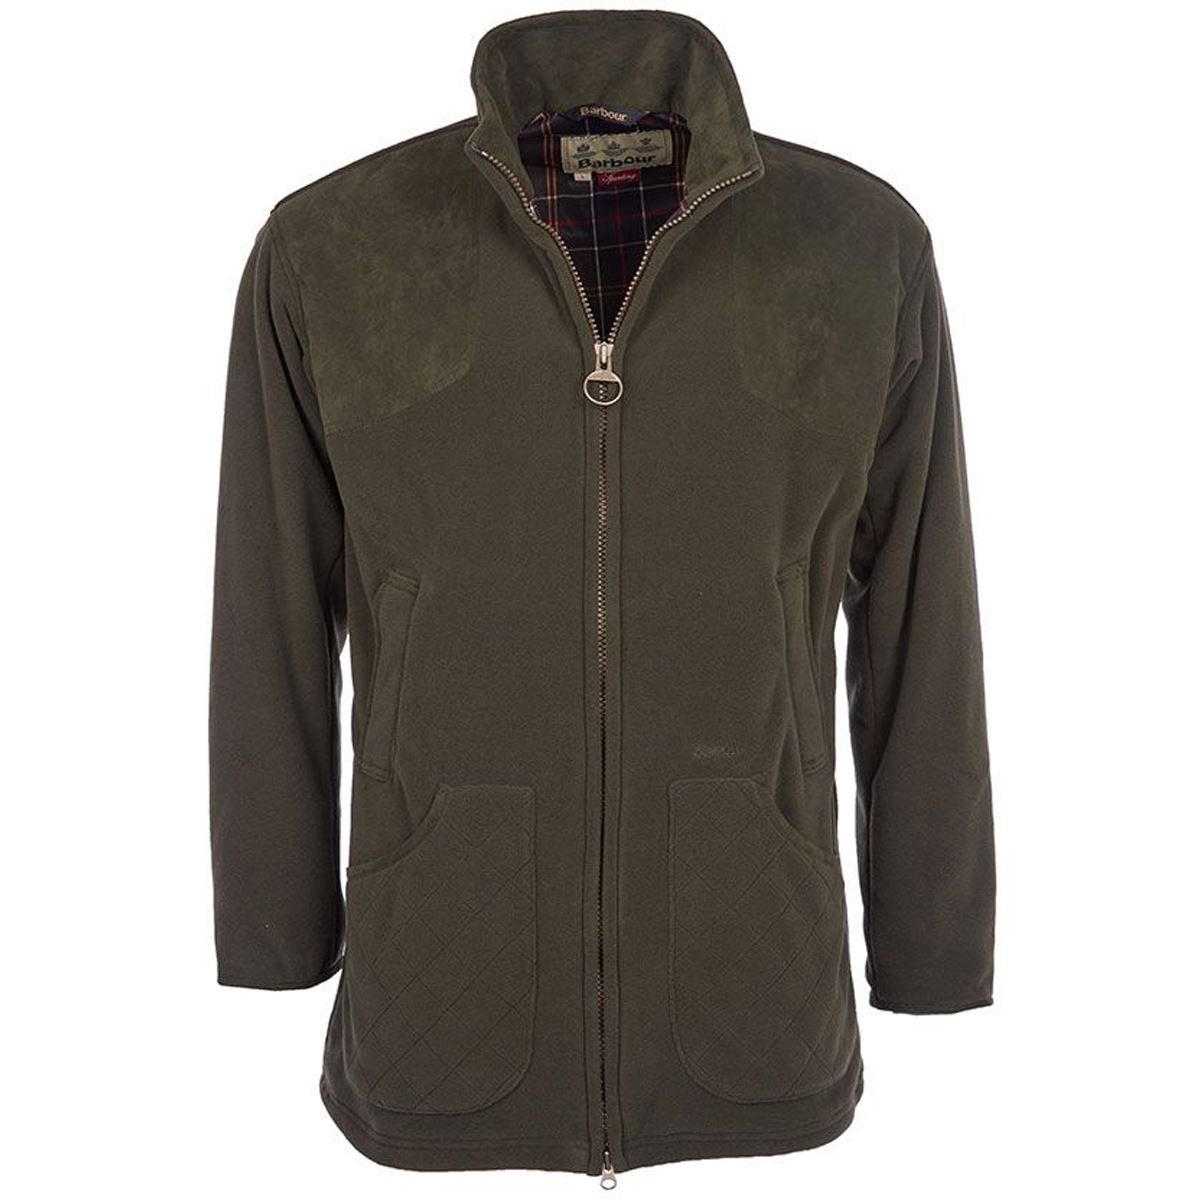 What sets the barbour dunmoor fleece apart as an exceptional shooting layer?